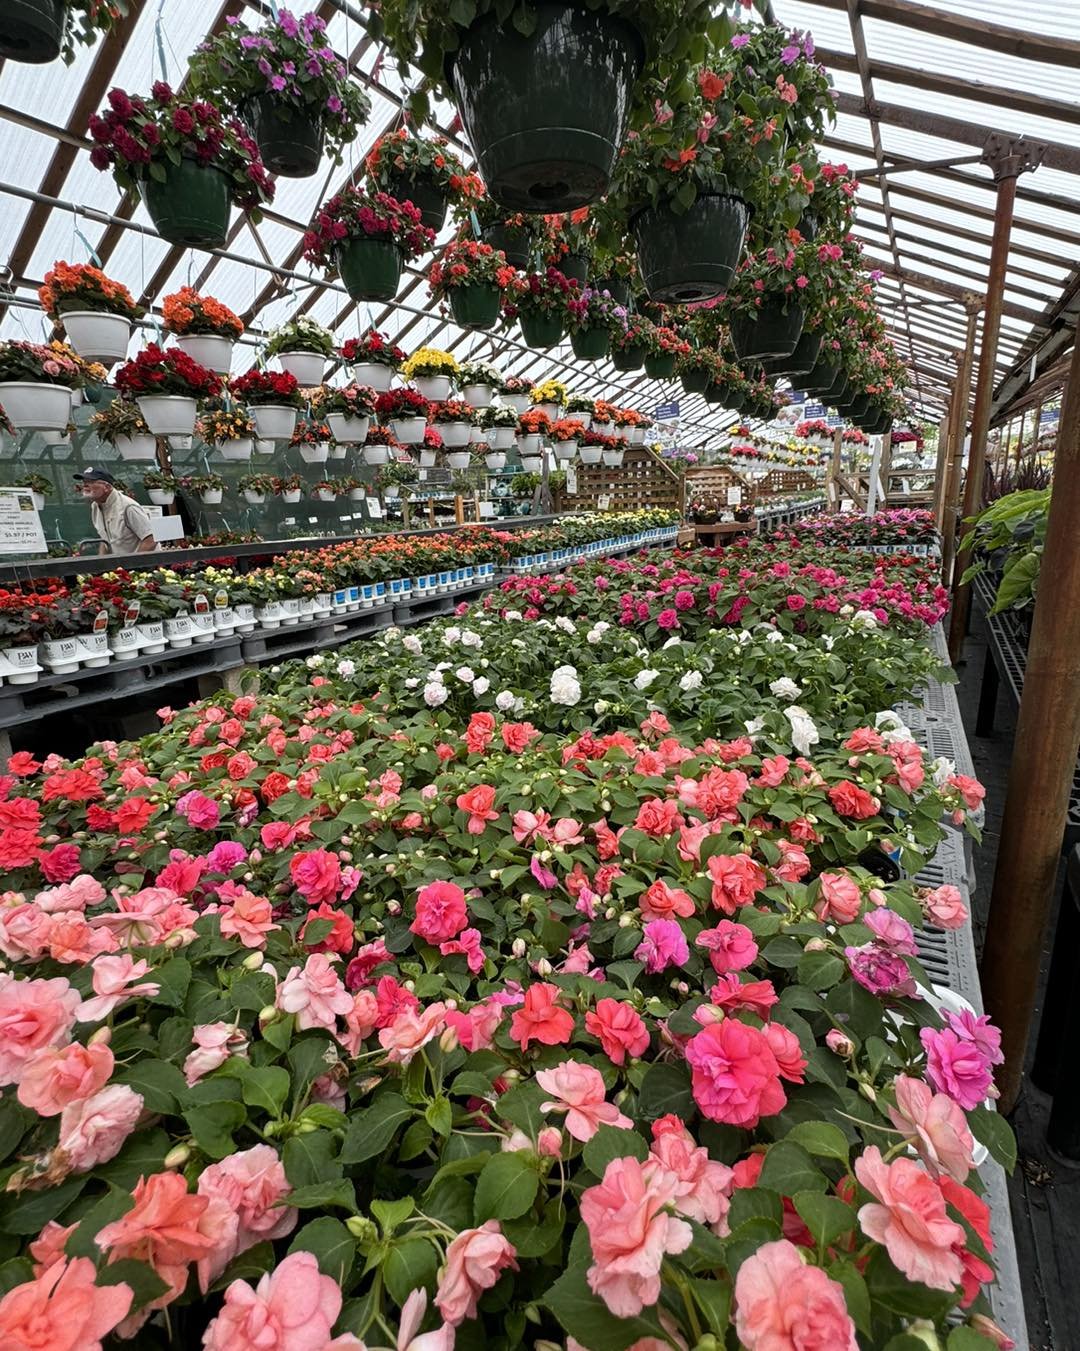 We have fresh loads of blooming baskets, patio pots, bedding plants, veggies and more!
.
Open 7 days a week, Come see us this weekend!